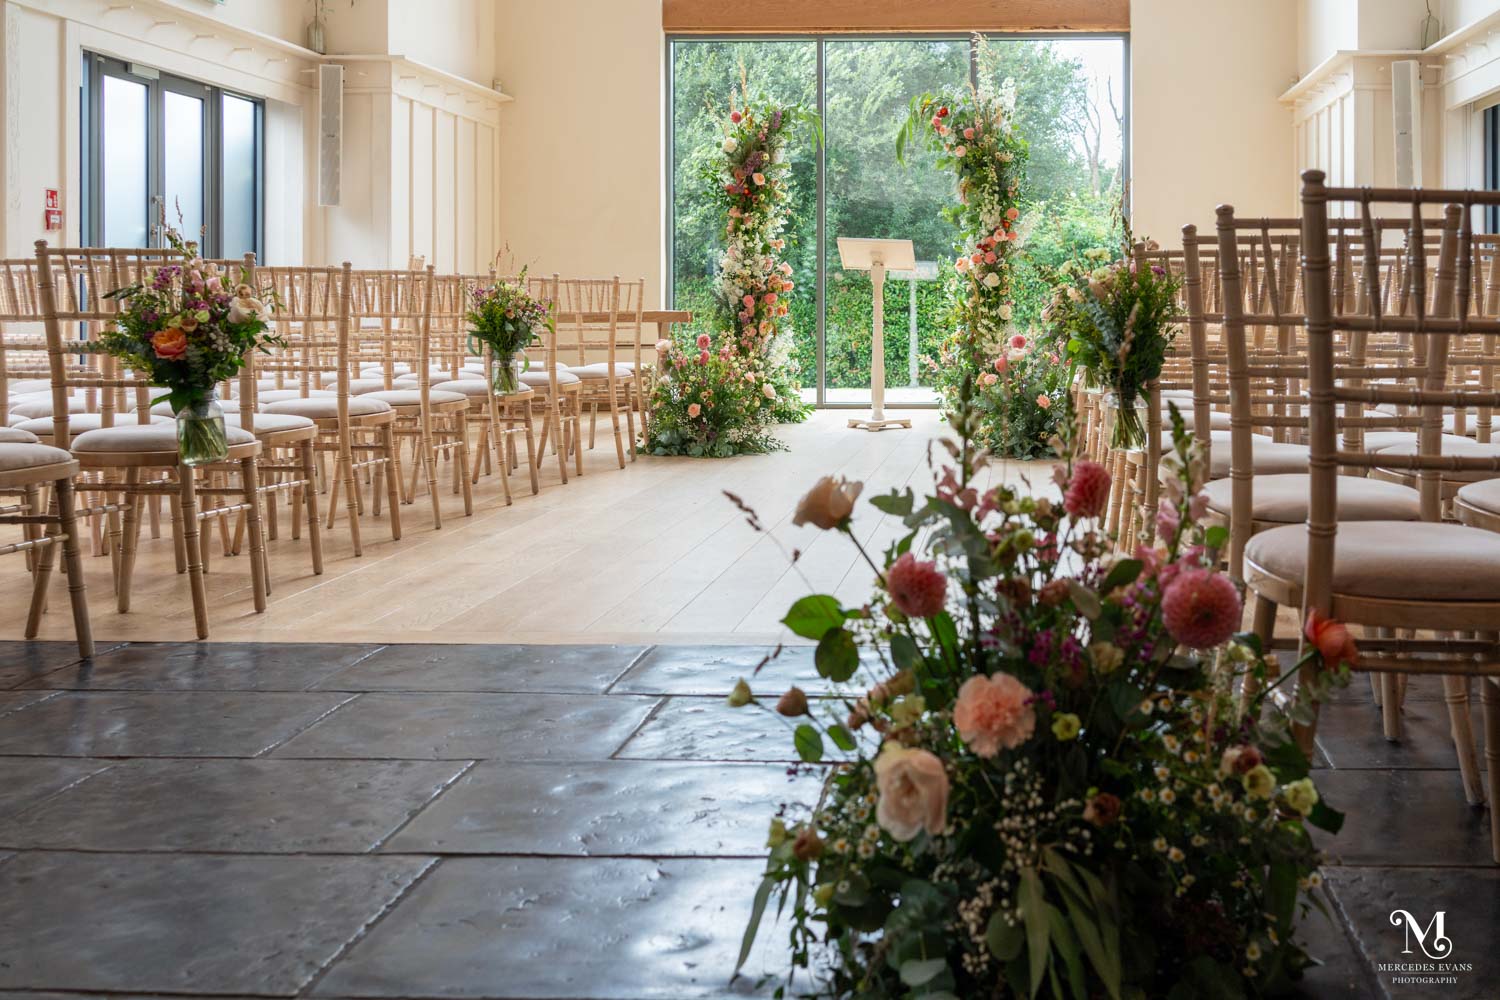 The ceremony room at Millbridge Court, set for a wedding with chiavari chairs and summer flowers